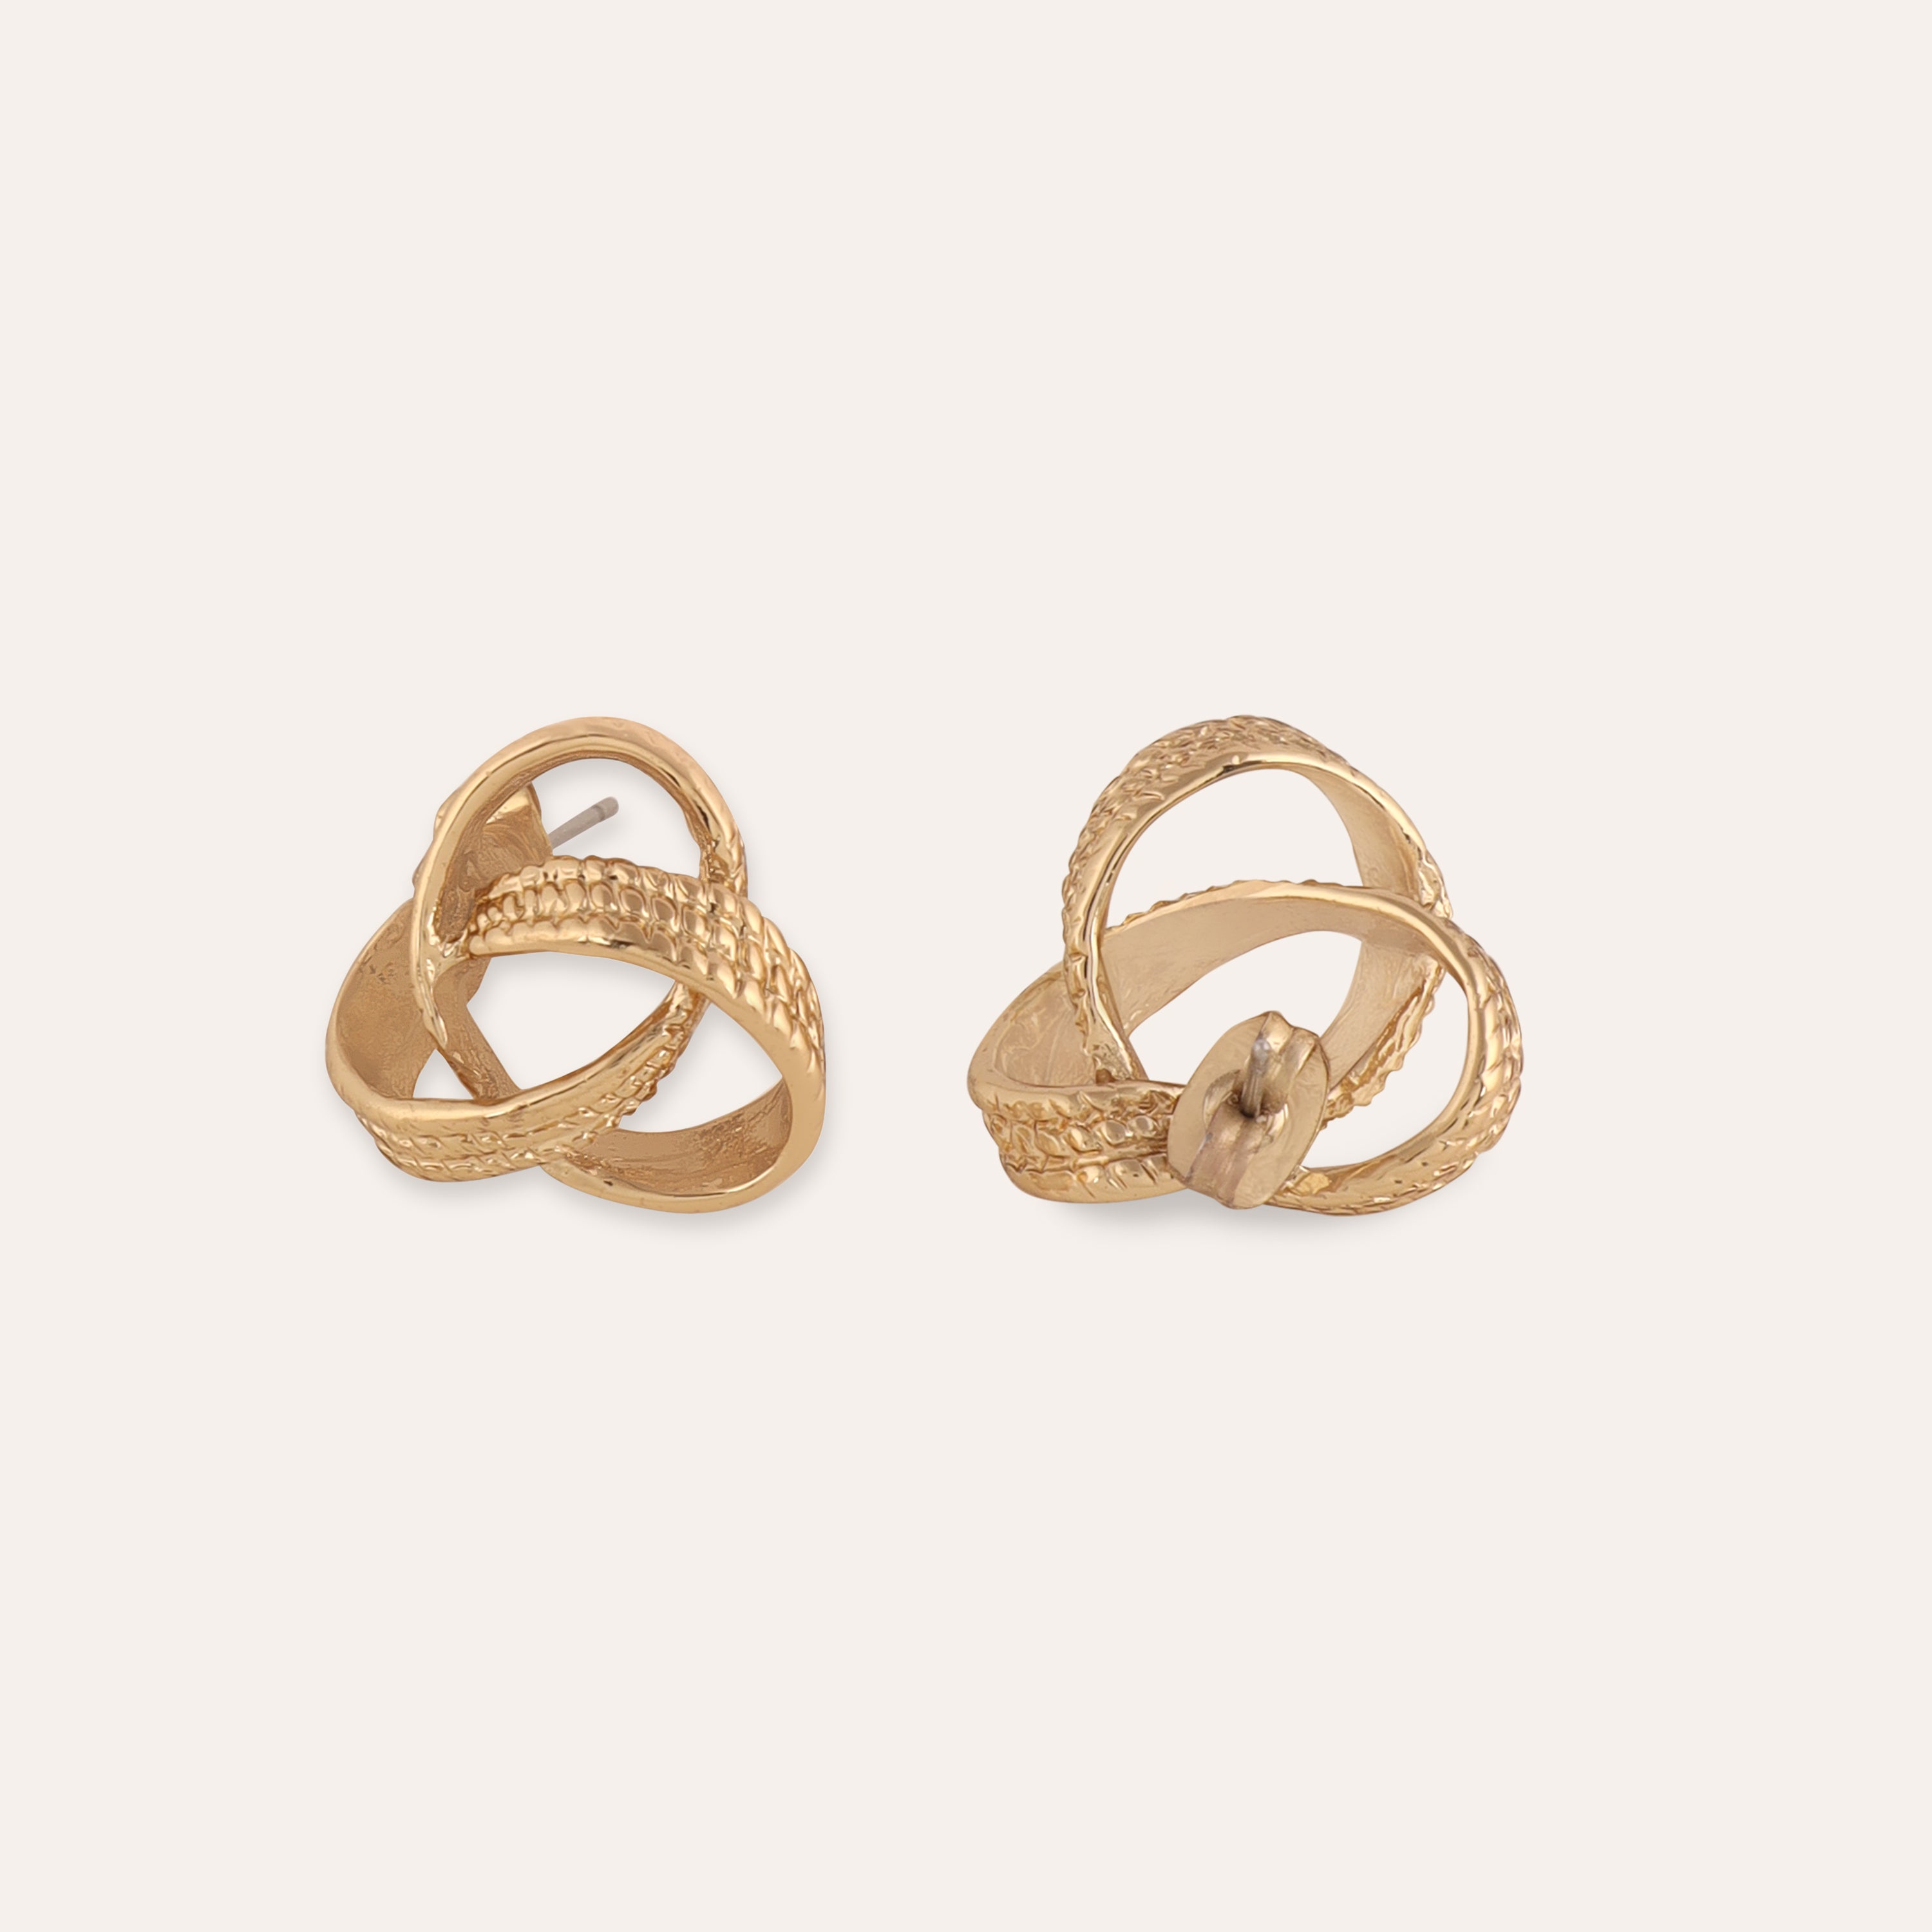 TFC Infinity Gold Plated Stud Earrings- Discover daily wear gold earrings including stud earrings, hoop earrings, and pearl earrings, perfect as earrings for women and earrings for girls.Find the cheapest fashion jewellery which is anti-tarnis​h only at The Fun company.